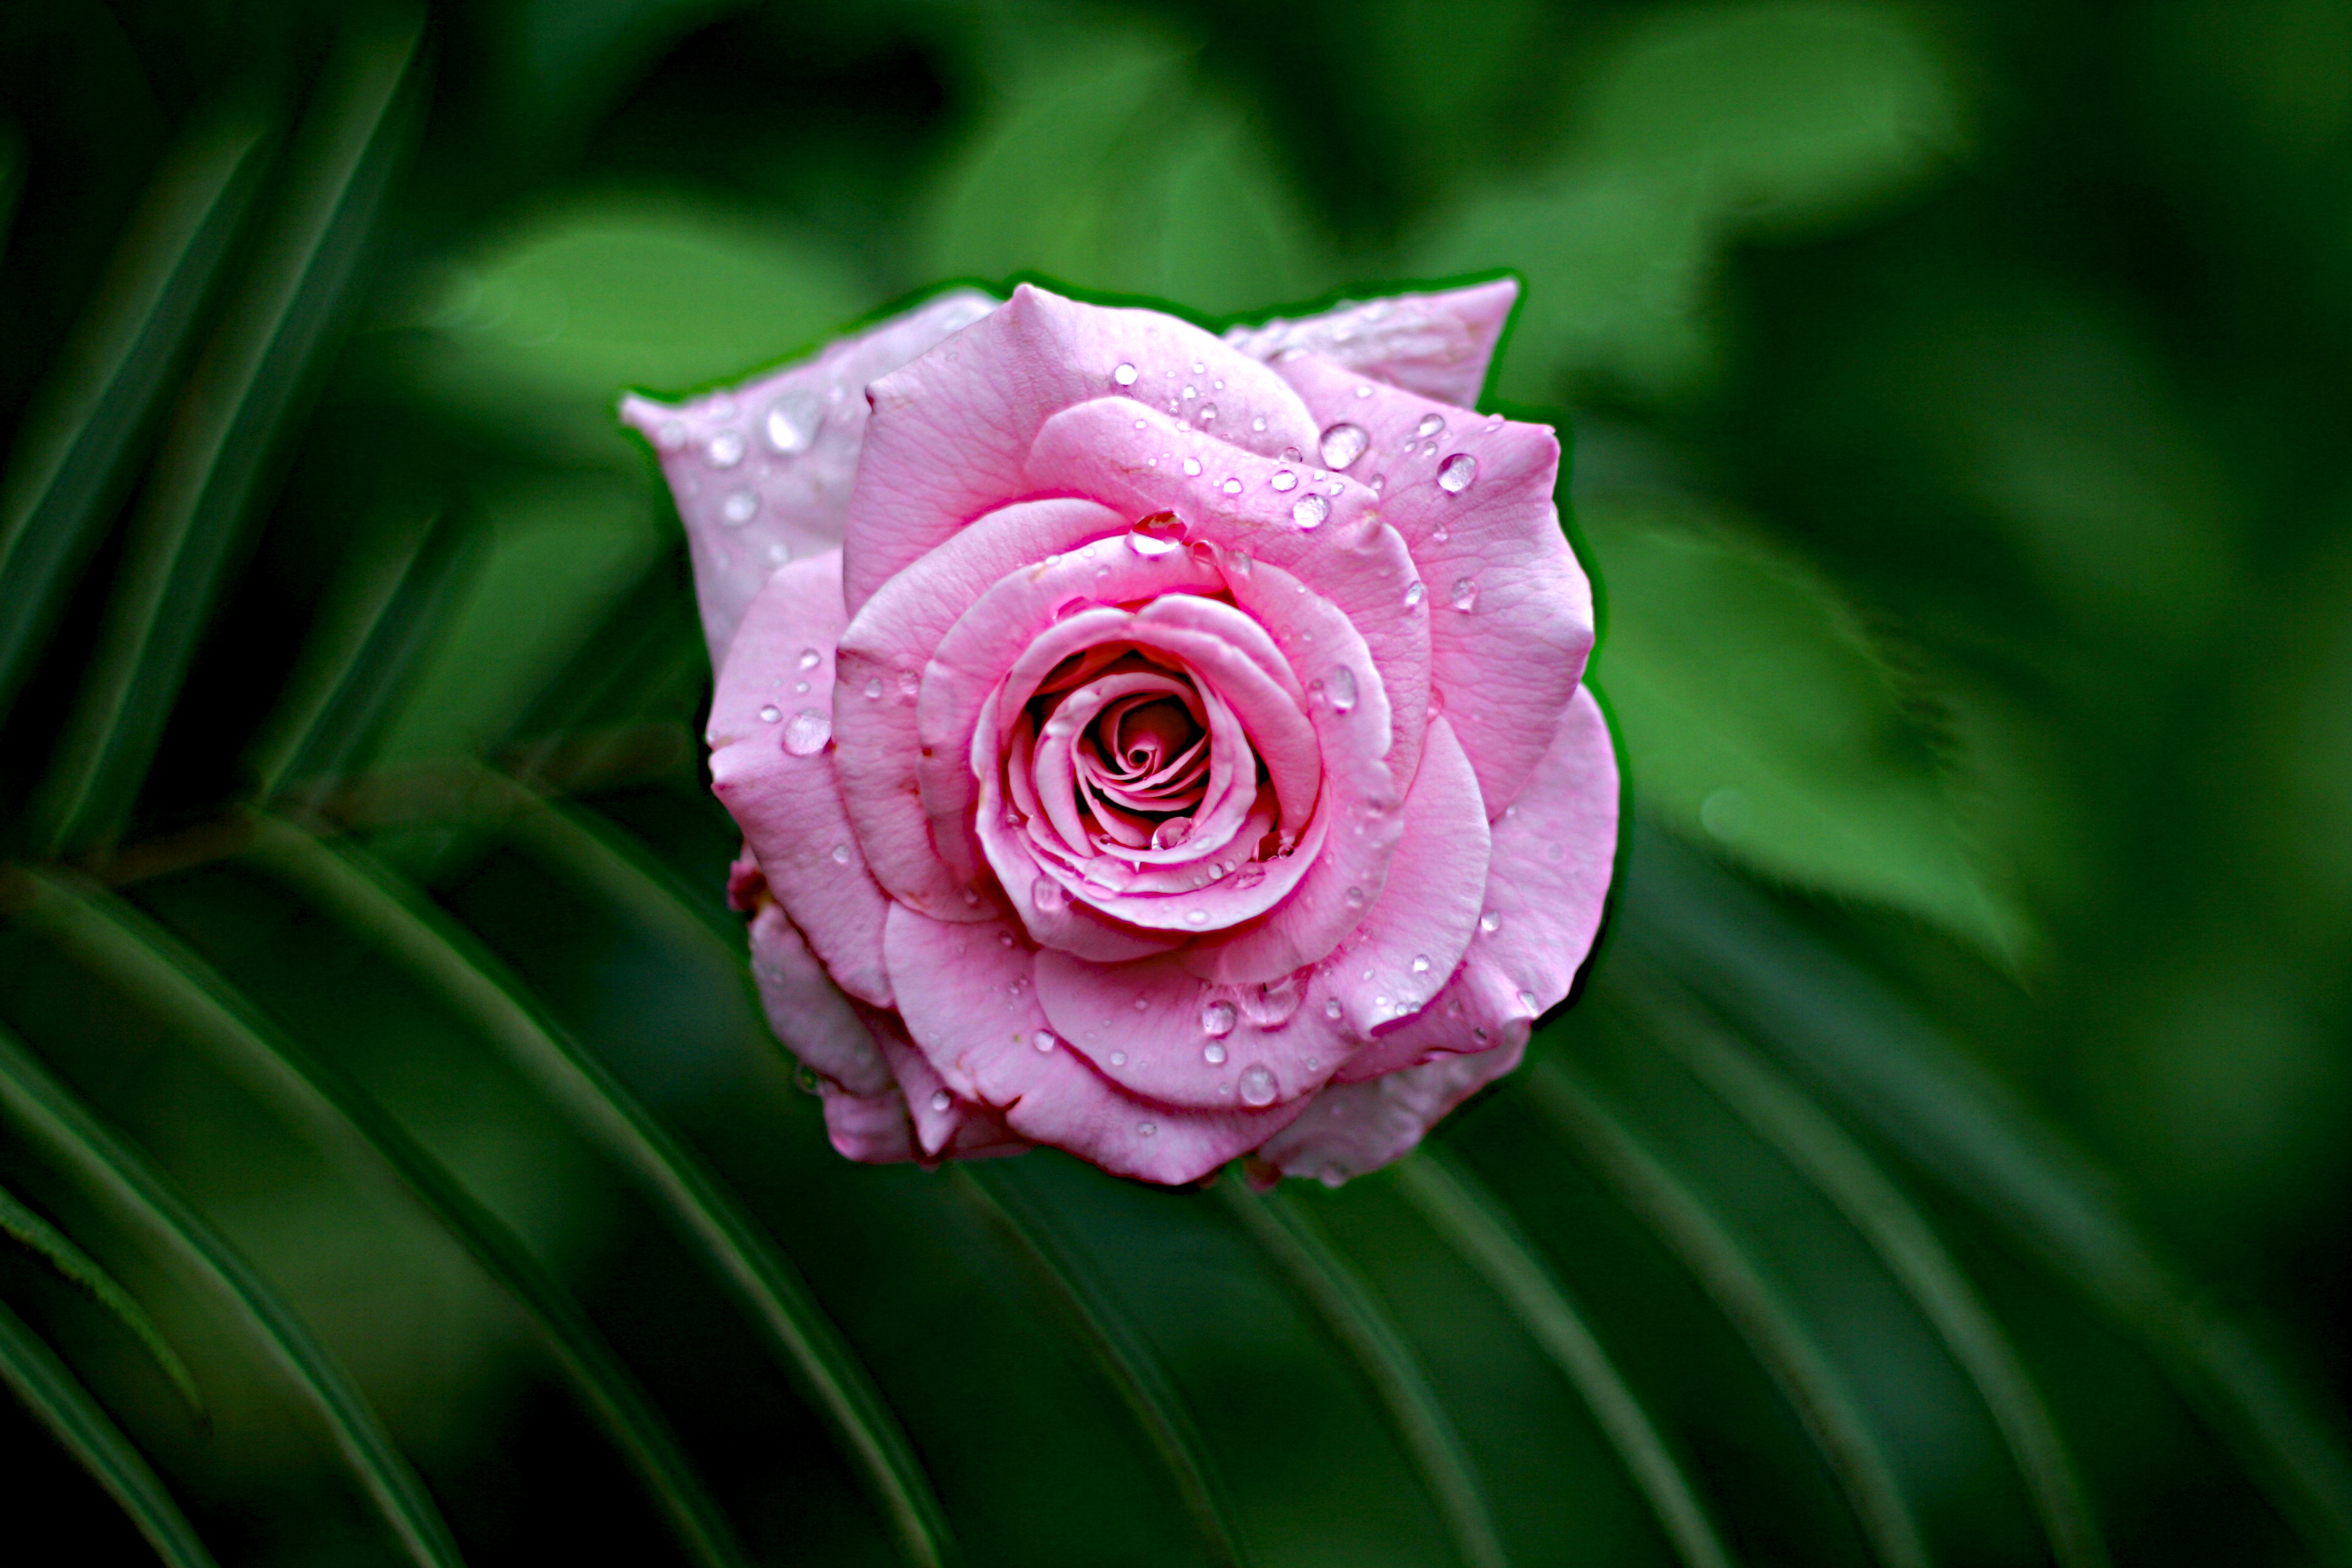 close up, rose flower, wet, drops, flowers, leaves, pink, rose, dew, to dissolve, blossom cellphone